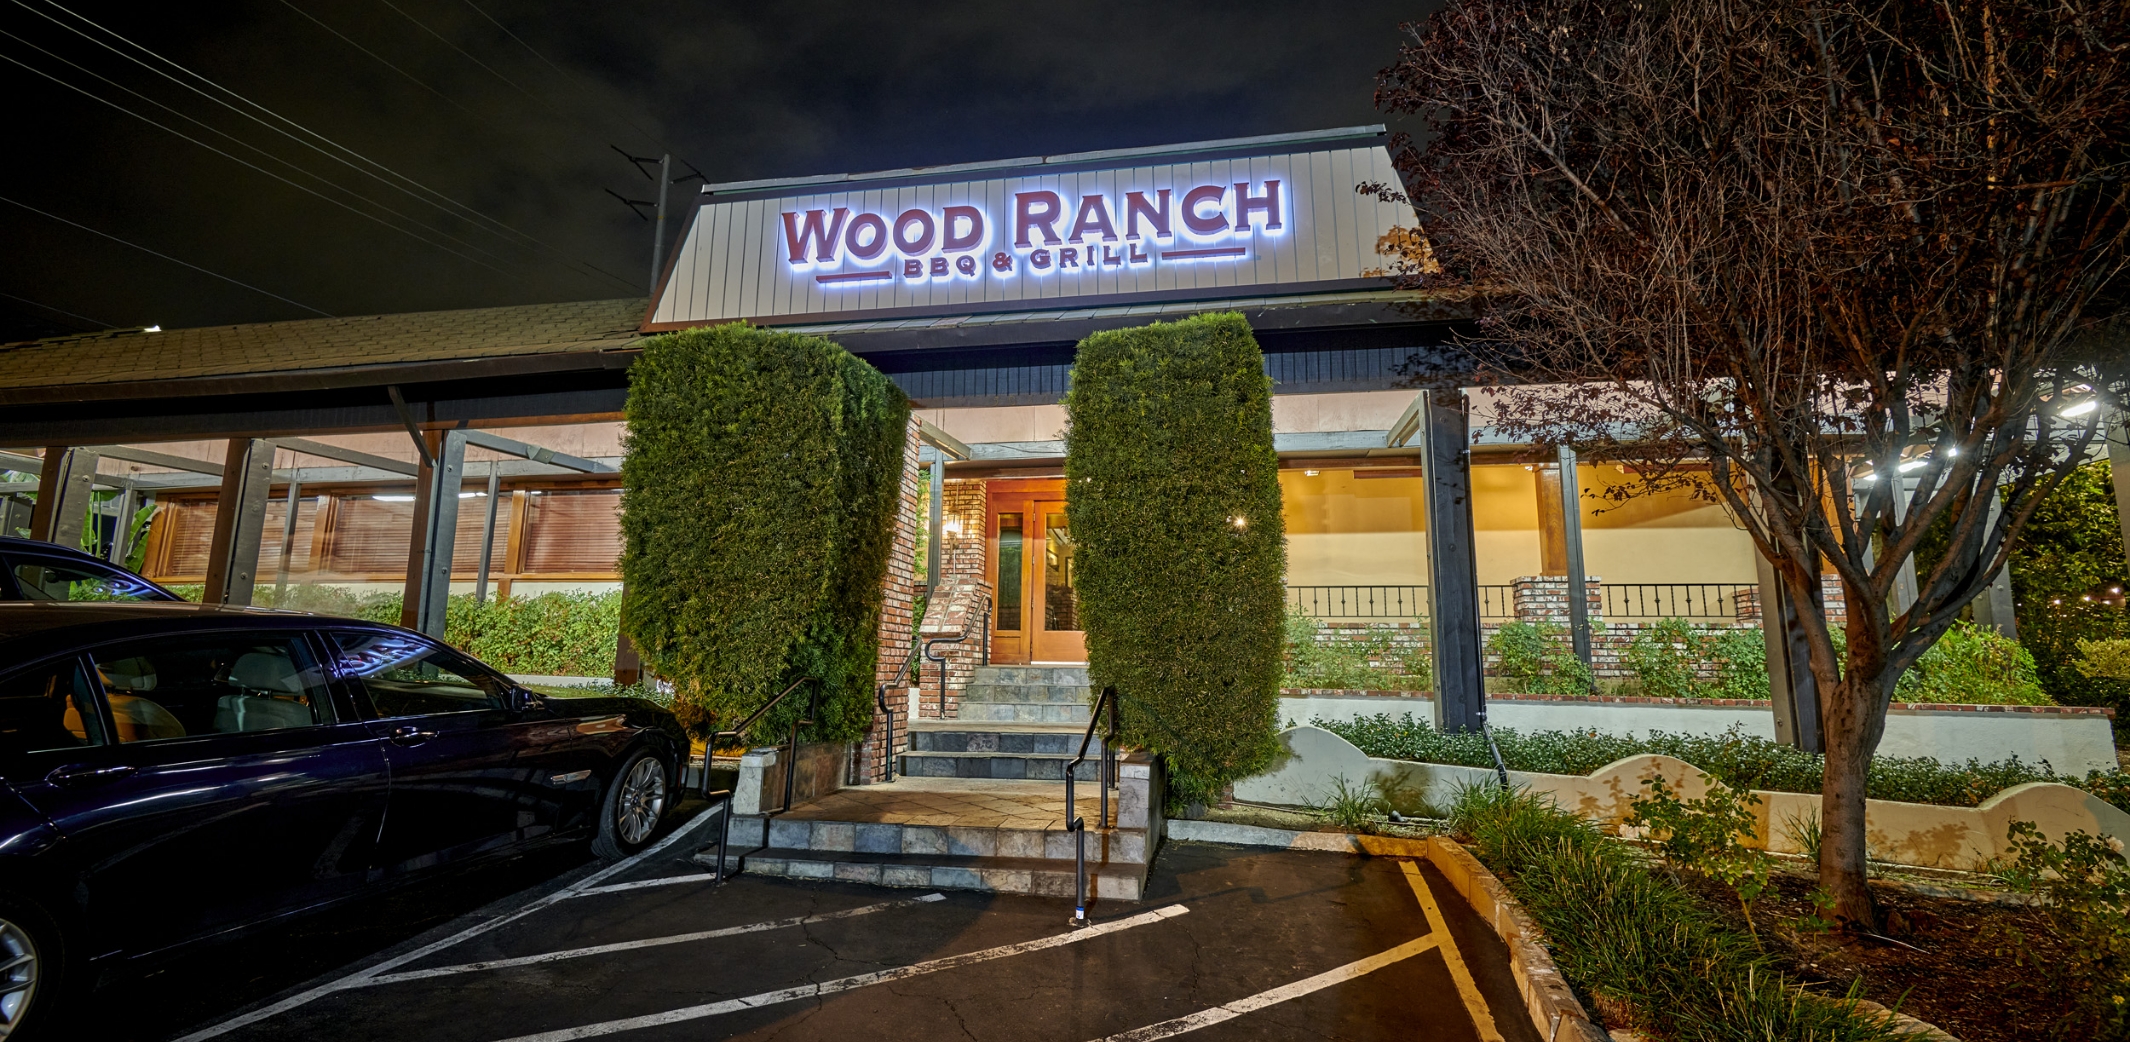 An evening view of Wood Ranch BBQ & Grill's exterior, featuring illuminated signage, neatly trimmed hedges, a brick stairway entrance, and a parked car.